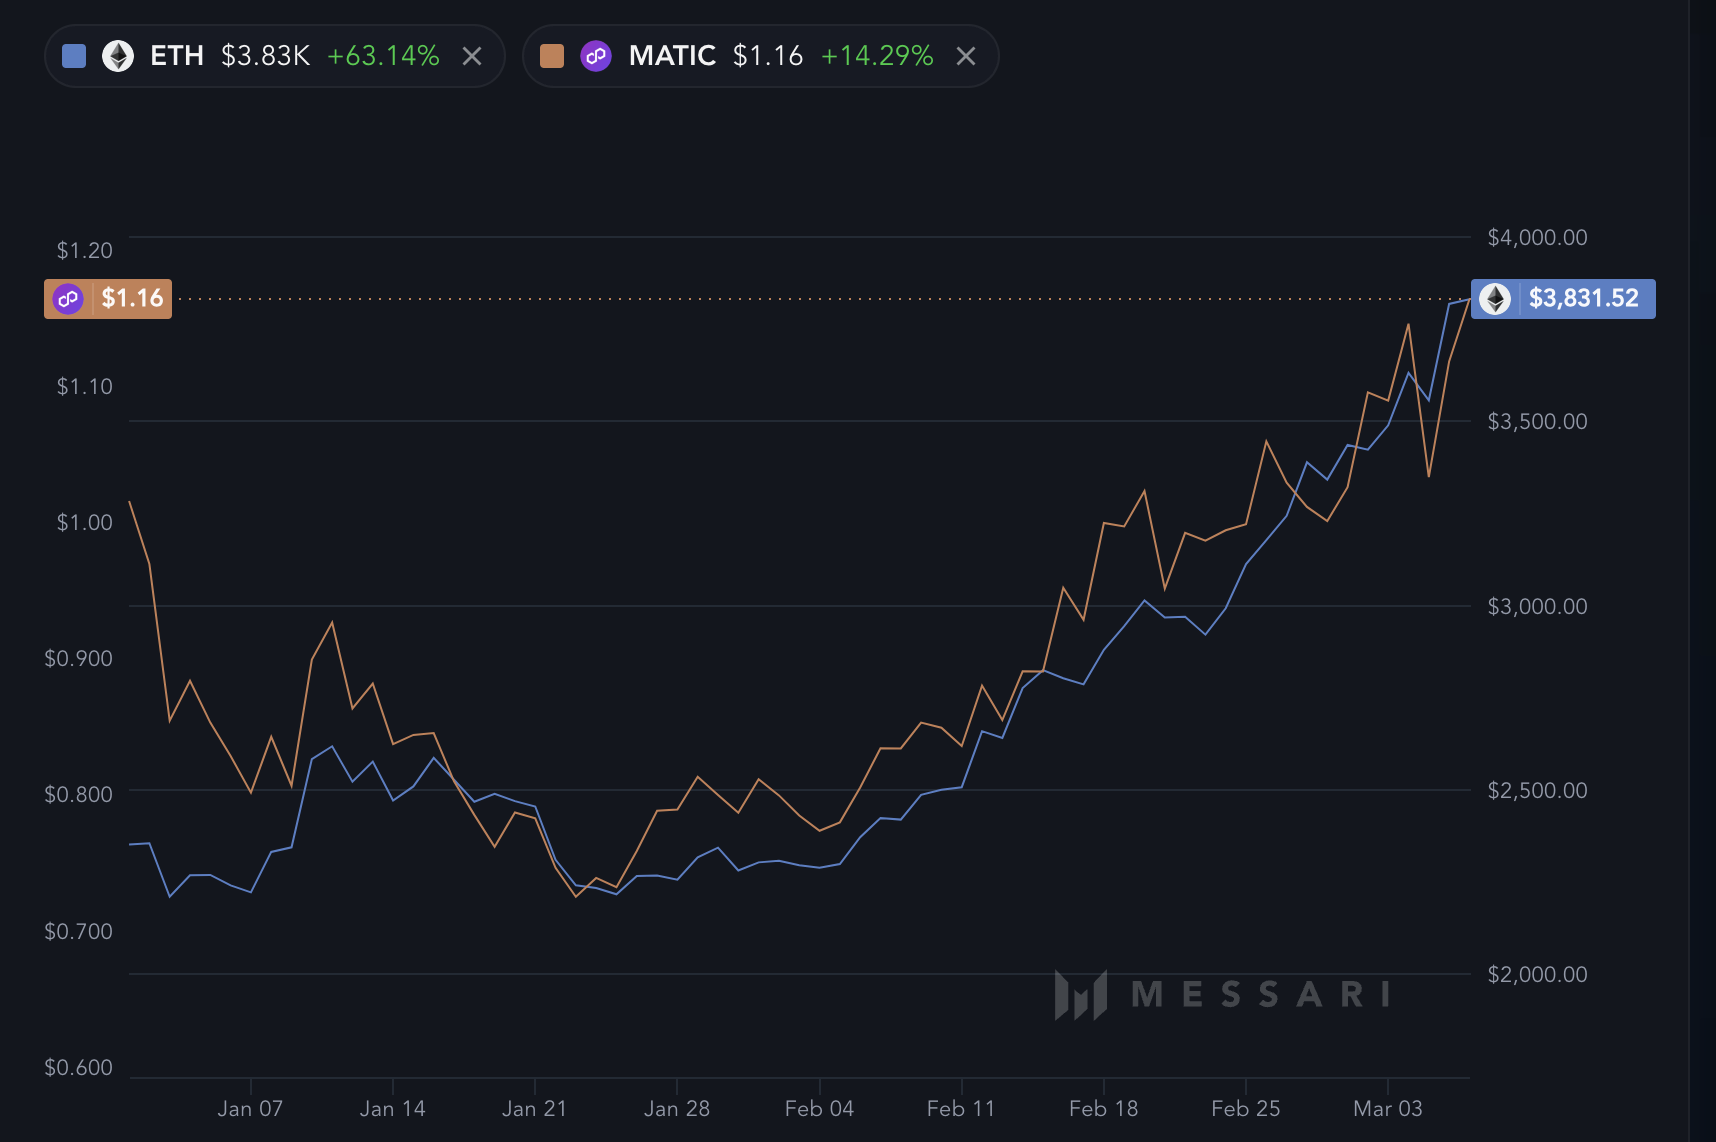 MATIC and ETH YTD price growth.